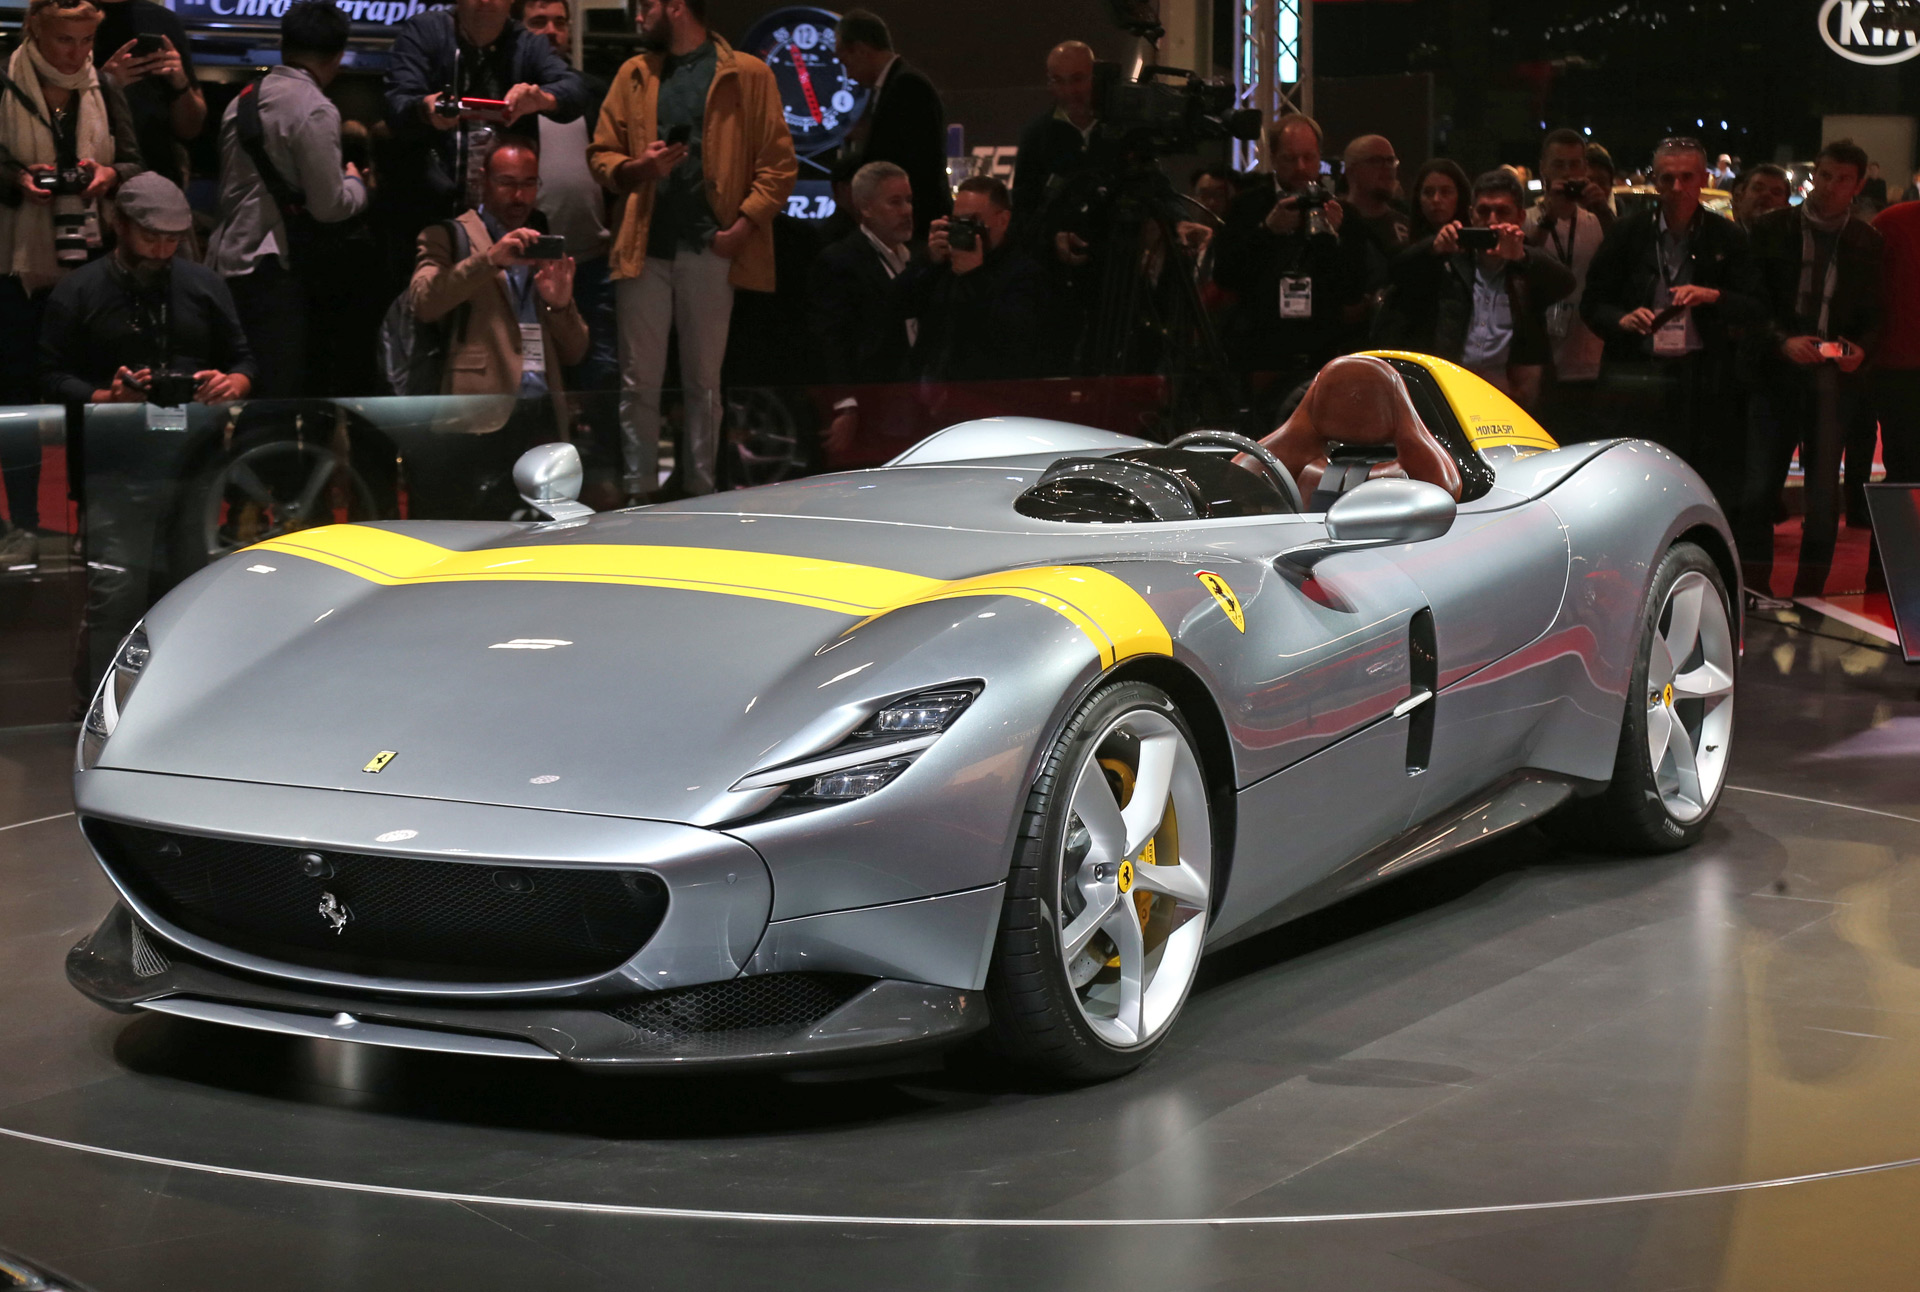 Ferrari 812 Superfast-based Monza speedsters debut in Paris, first of new Icona series